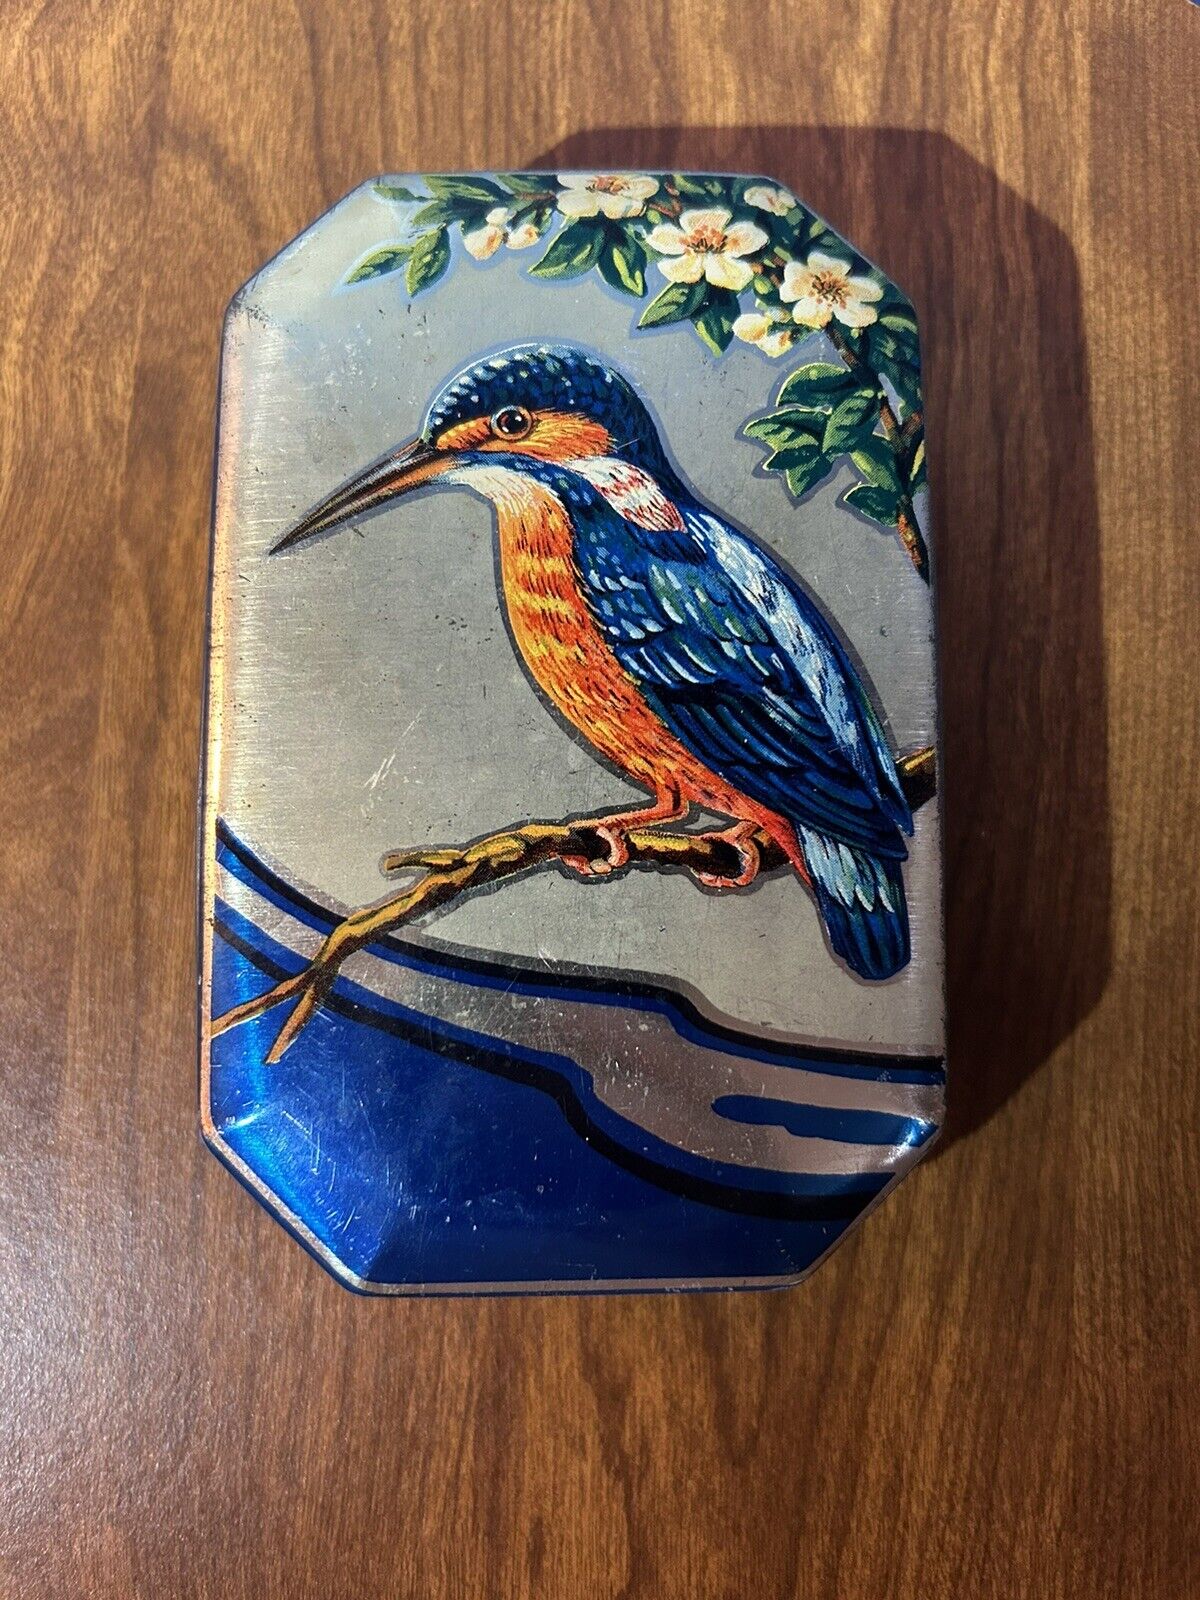 Vintage Horner England Toffee Tin The Kingfisher Collectible Rare